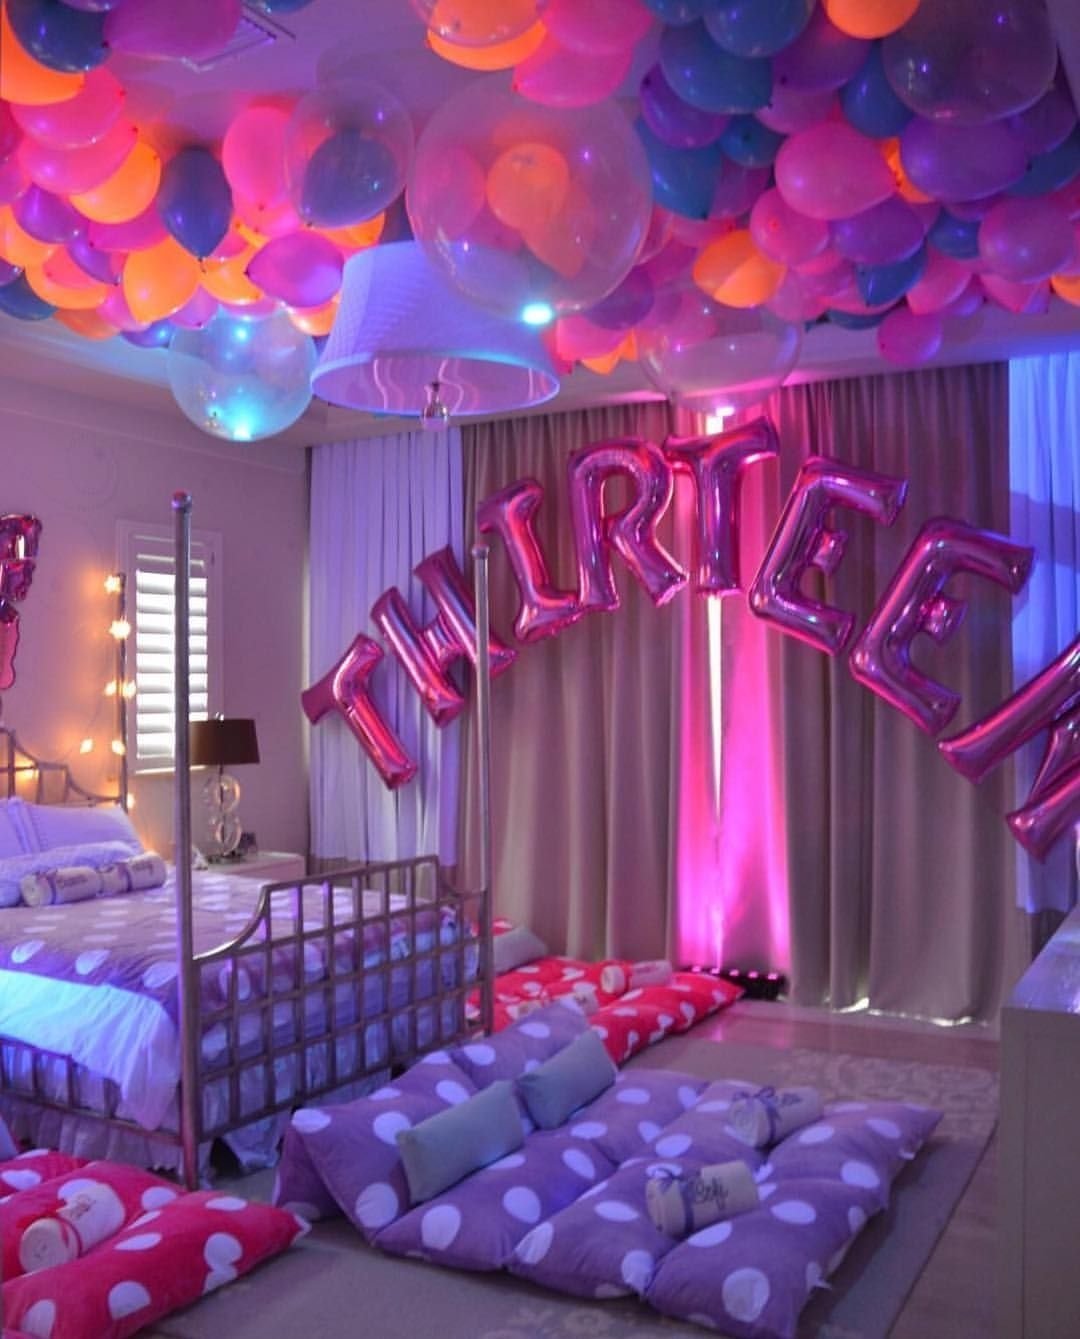 10 Gorgeous Birthday Party Ideas For A 13 Year Old Girl the cutest birthday look for a 13 year old girlcenter stage 2022